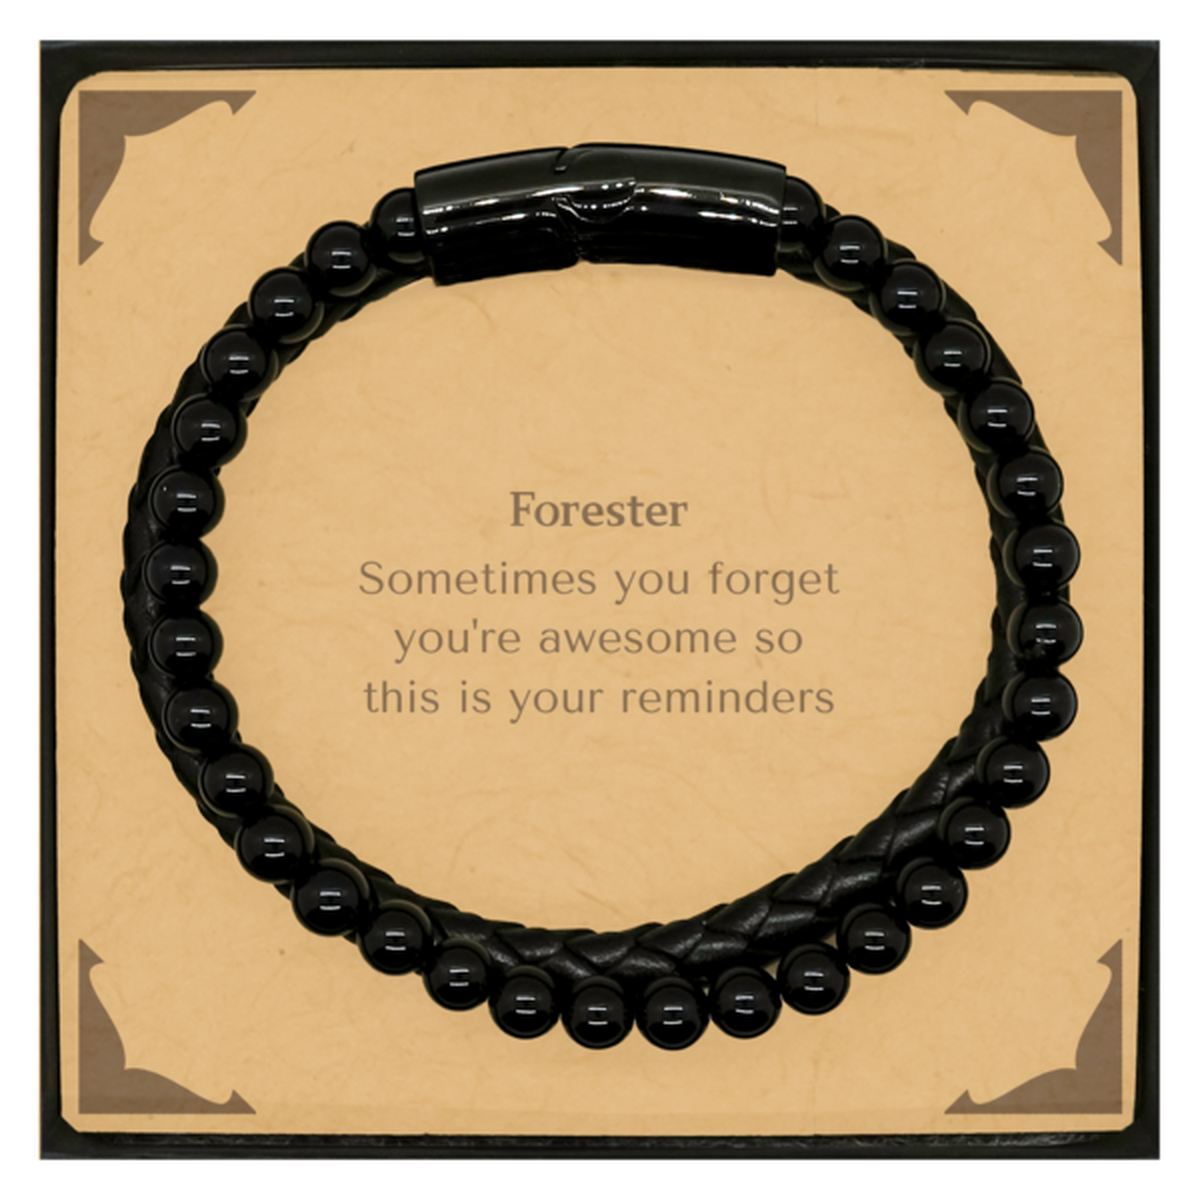 Sentimental Forester Stone Leather Bracelets, Forester Sometimes you forget you're awesome so this is your reminders, Graduation Christmas Birthday Gifts for Forester, Men, Women, Coworkers